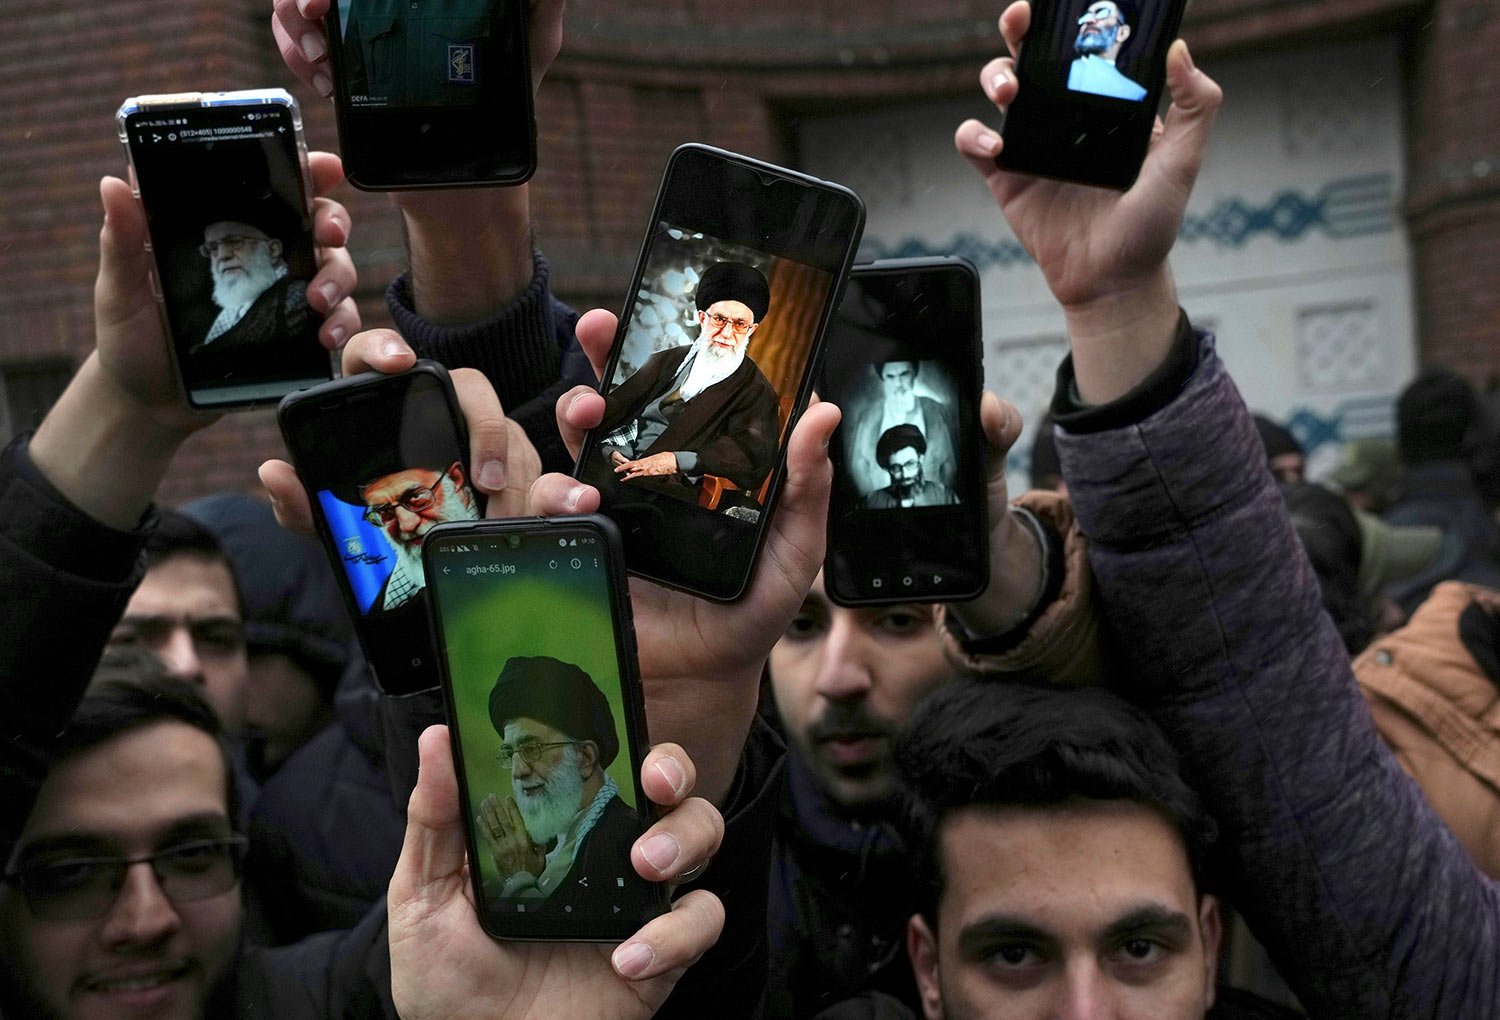  Iranian demonstrators show photos of the Supreme Leader Ayatollah Ali Khamenei on the screen of their cellphones during their protest against cartoons published by the French satirical magazine Charlie Hebdo that lampoon Iran's ruling clerics, in fr